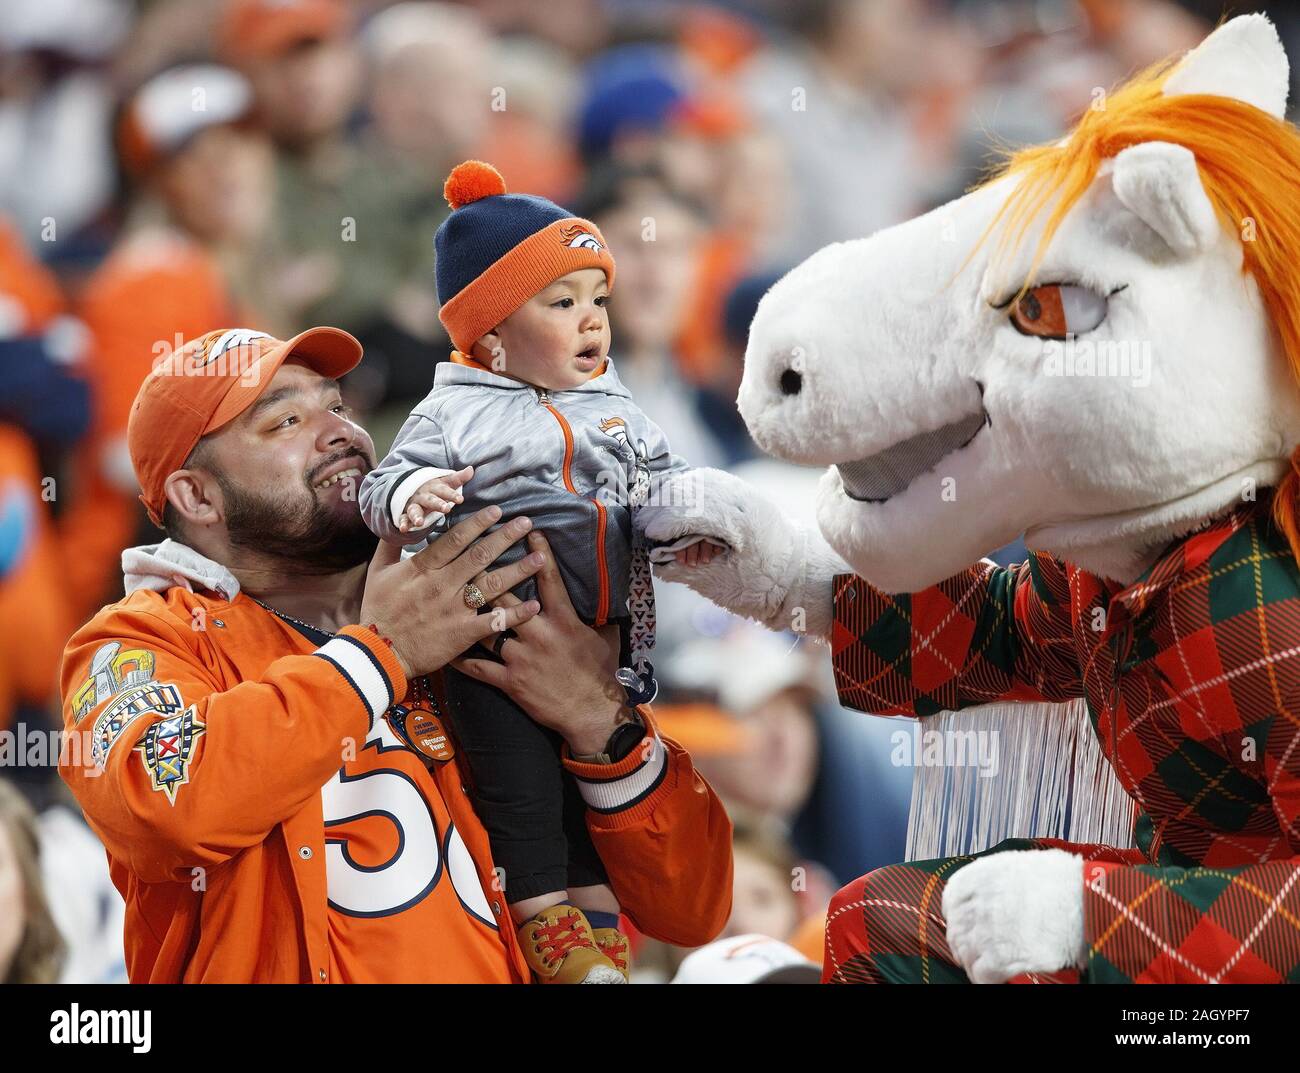 Denver, Colorado, USA. 22nd Dec, 2019. A young Denver Broncos fan, center, meets Denver Broncos mascot MILES, right, during the 2nd. Half Sunday afternoon at Empower Field at Mile High in Denver CO. Broncos beat the Lions 27-17 Credit: Hector Acevedo/ZUMA Wire/Alamy Live News Stock Photo